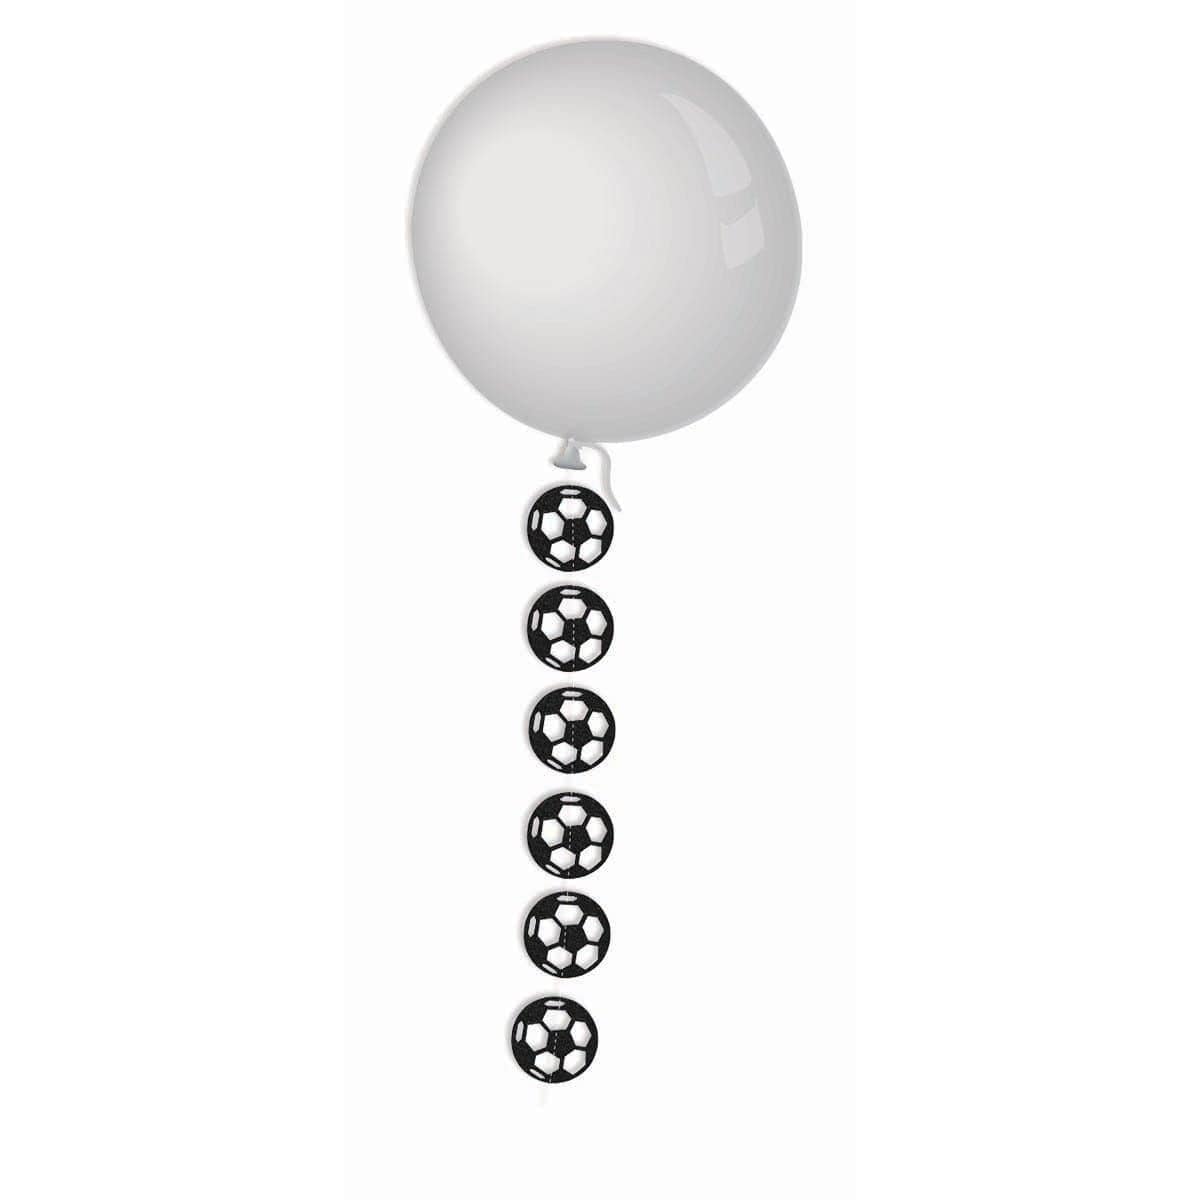 Buy Balloons Balloon Soccer Themed Mini Banner sold at Party Expert